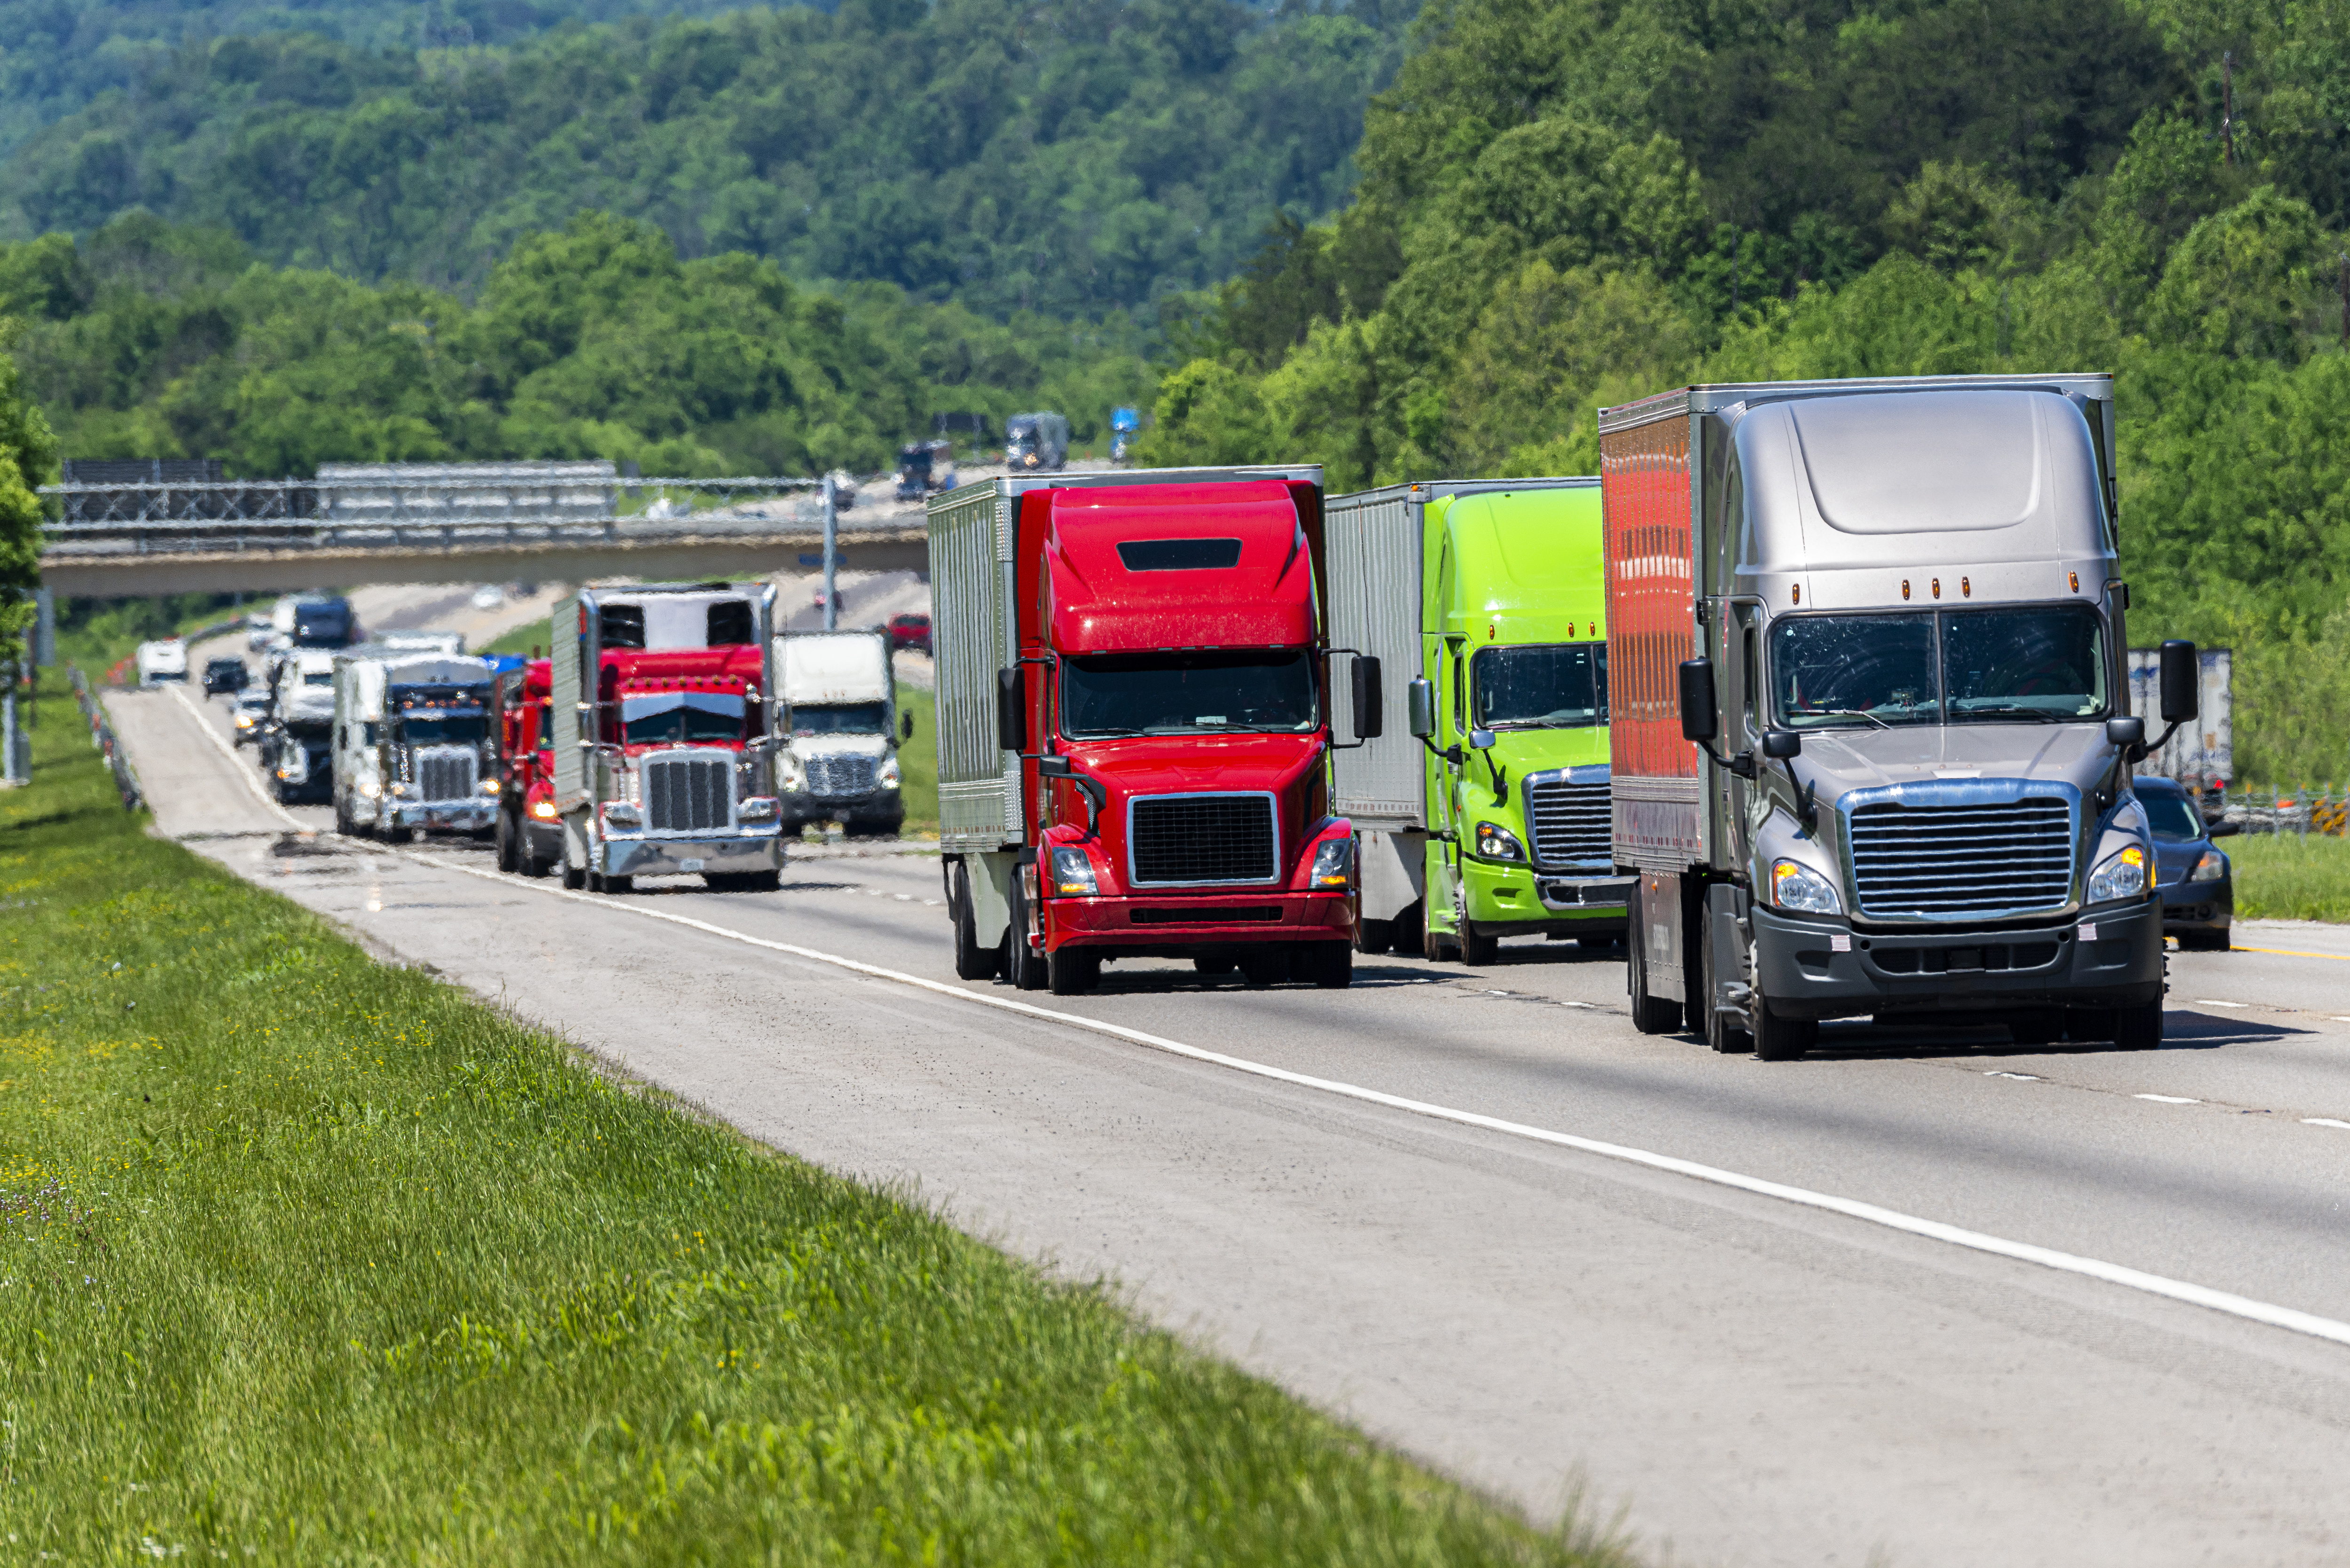 Convoy: Solving the Problems of Freight